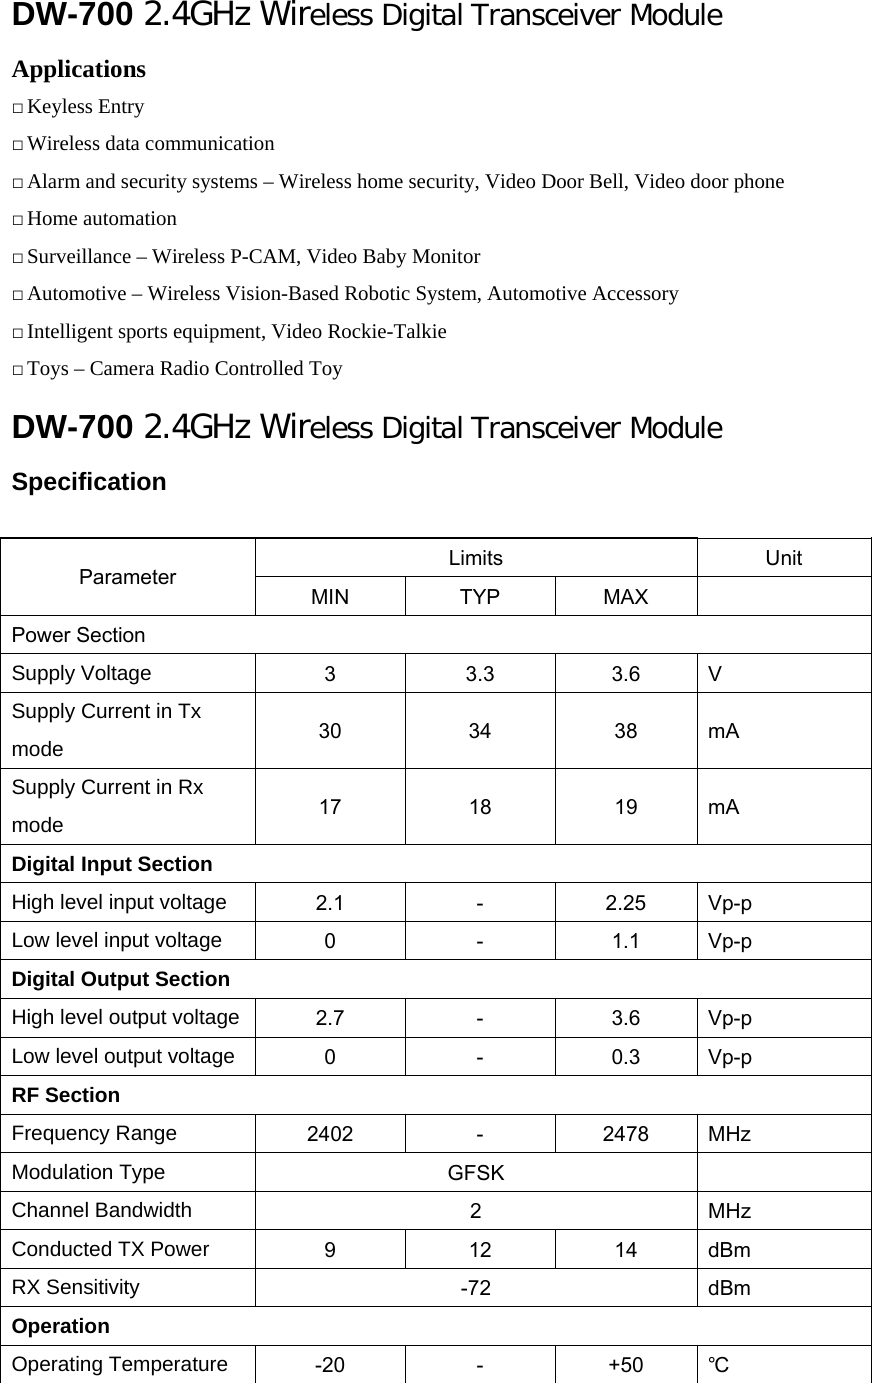 DW-700 2.4GHz Wireless Digital Transceiver Module Applications  Keyless Entry  Wireless data communication  Alarm and security systems – Wireless home security, Video Door Bell, Video door phone  Home automation  Surveillance – Wireless P-CAM, Video Baby Monitor  Automotive – Wireless Vision-Based Robotic System, Automotive Accessory  Intelligent sports equipment, Video Rockie-Talkie  Toys – Camera Radio Controlled Toy DW-700 2.4GHz Wireless Digital Transceiver Module  Specification  Limits  Unit Parameter  MIN  TYP  MAX   Power Section Supply Voltage 3  3.3  3.6  V Supply Current in Tx mode  30  34  38  mA Supply Current in Rx mode  17  18  19  mA Digital Input Section High level input voltage  2.1  －  2.25  Vp-p Low level input voltage  0  －  1.1  Vp-p Digital Output Section High level output voltage  2.7  －  3.6  Vp-p Low level output voltage  0  －  0.3  Vp-p RF Section Frequency Range  2402  －  2478  MHz Modulation Type  GFSK   Channel Bandwidth  2  MHz Conducted TX Power  9  12  14  dBm RX Sensitivity  -72  dBm Operation Operating Temperature -20  －  +50  ℃ 